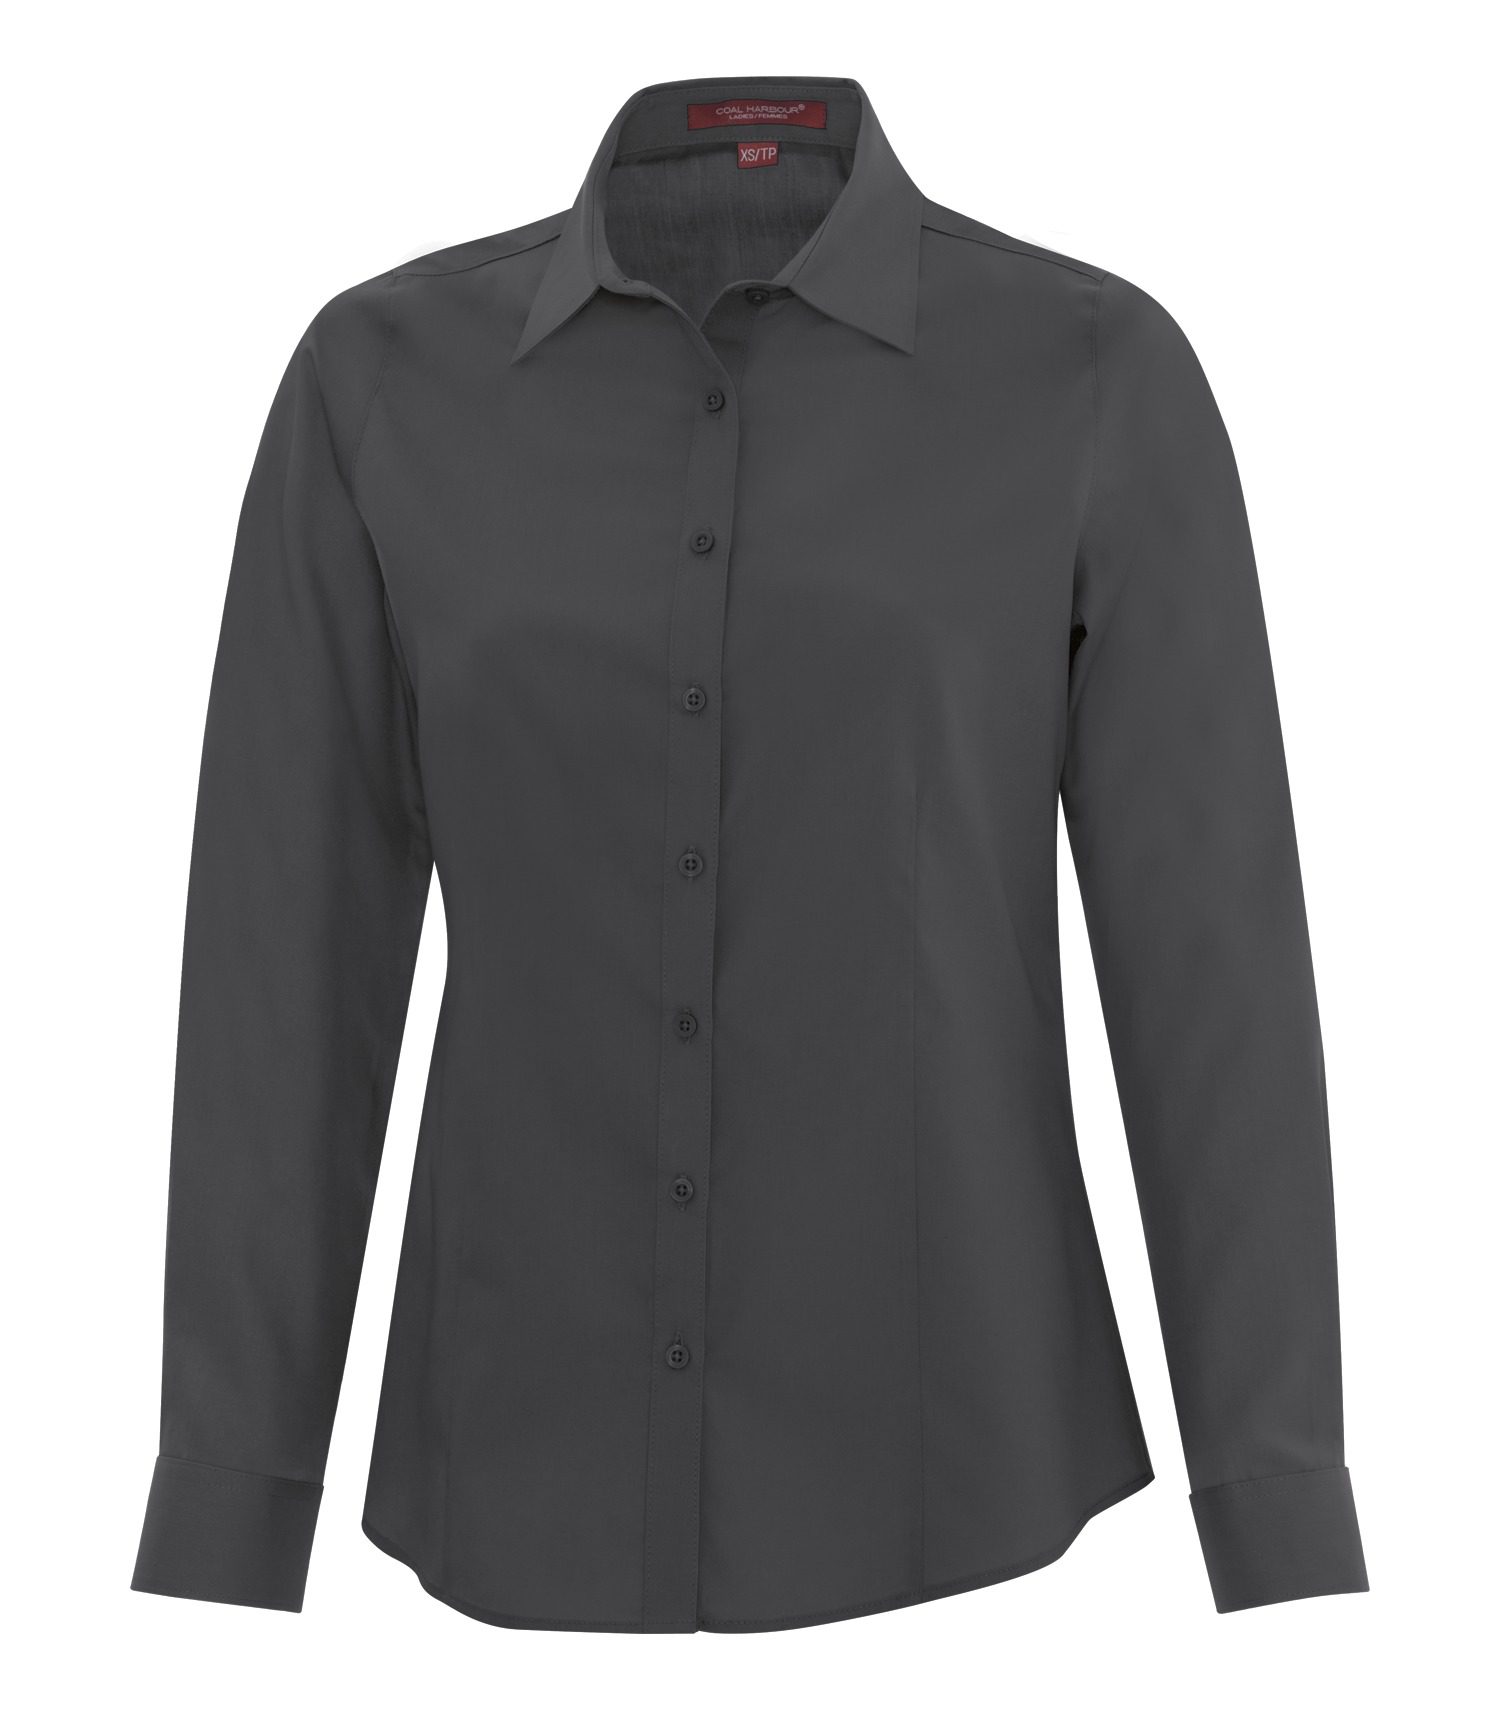 COAL HARBOUR® EVERYDAY LONG SLEEVE LADIES' WOVEN SHIRT #L6013 Iron Grey